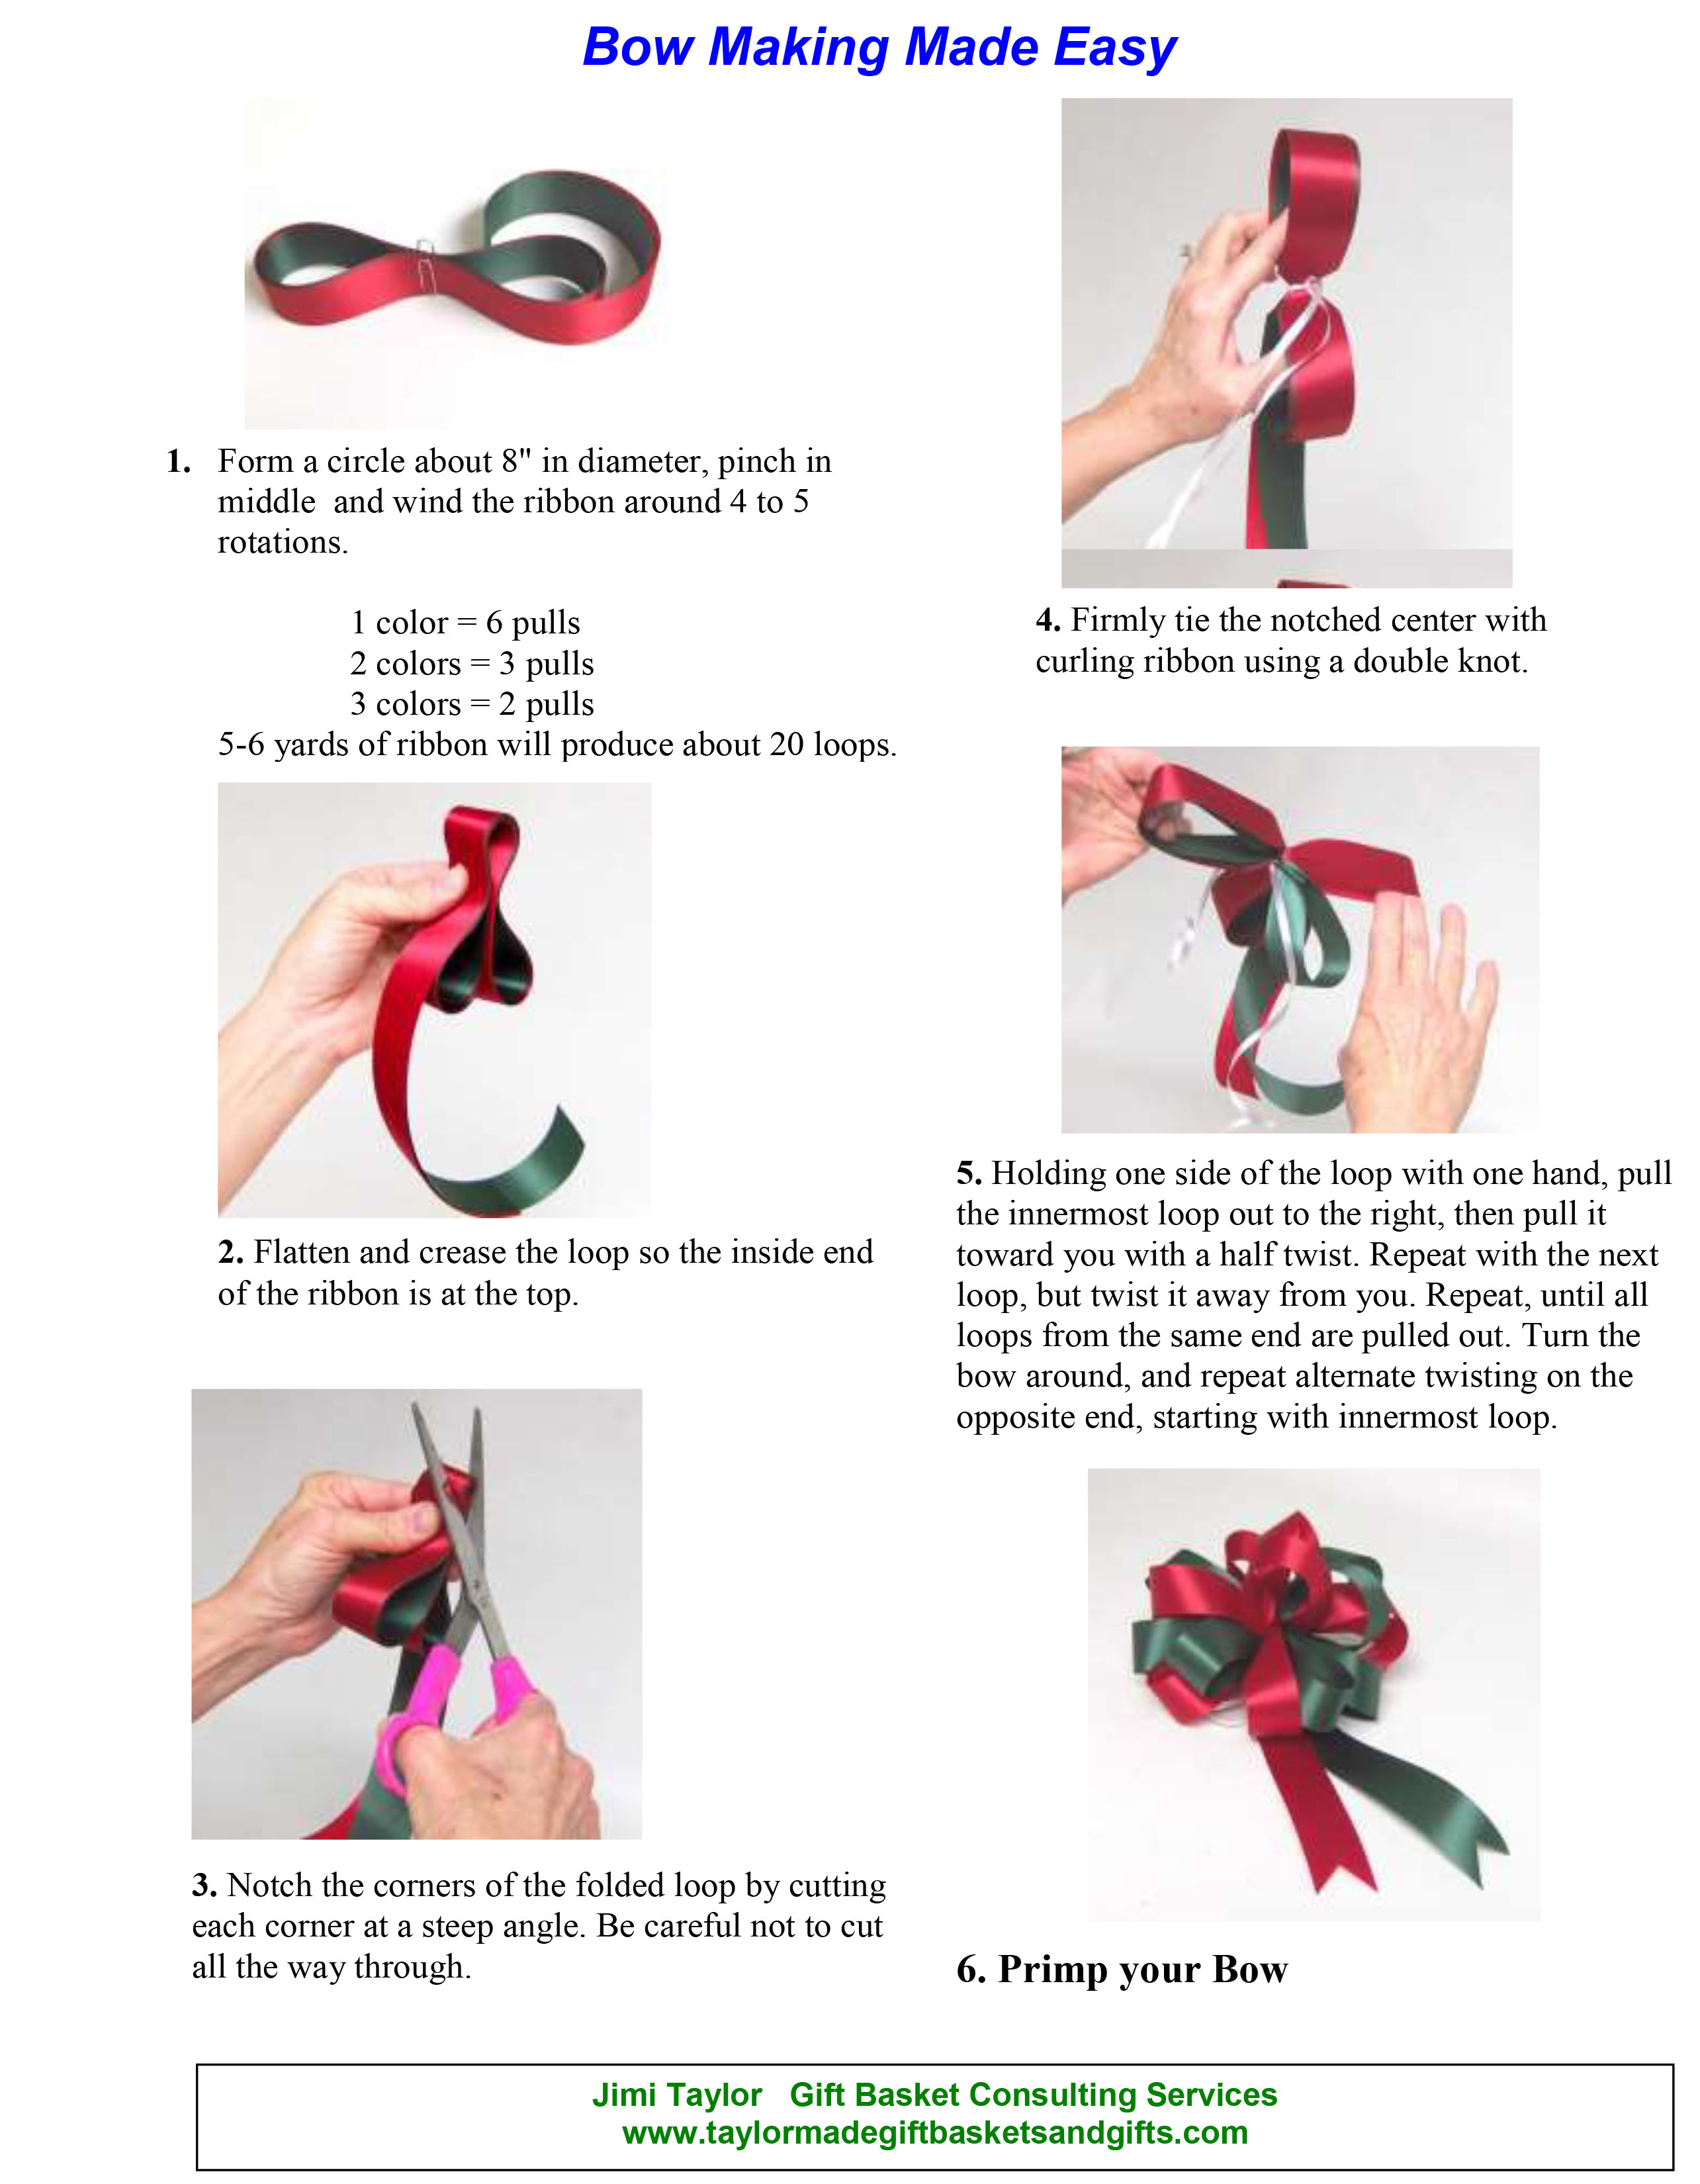 Bow Making Made Easy